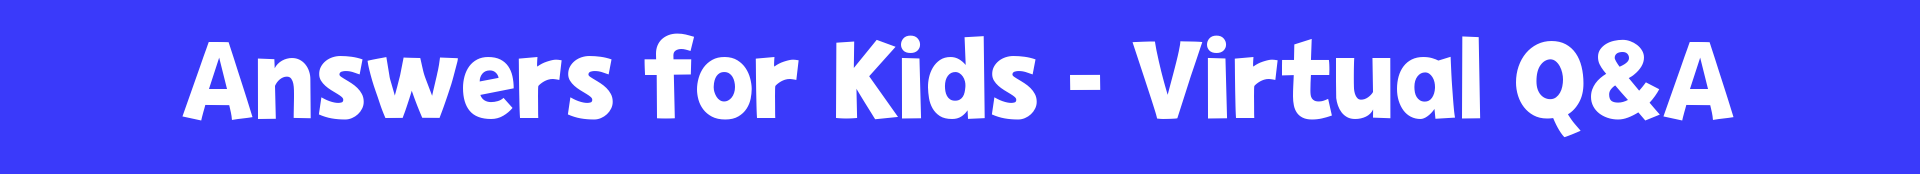 answer for kids banner